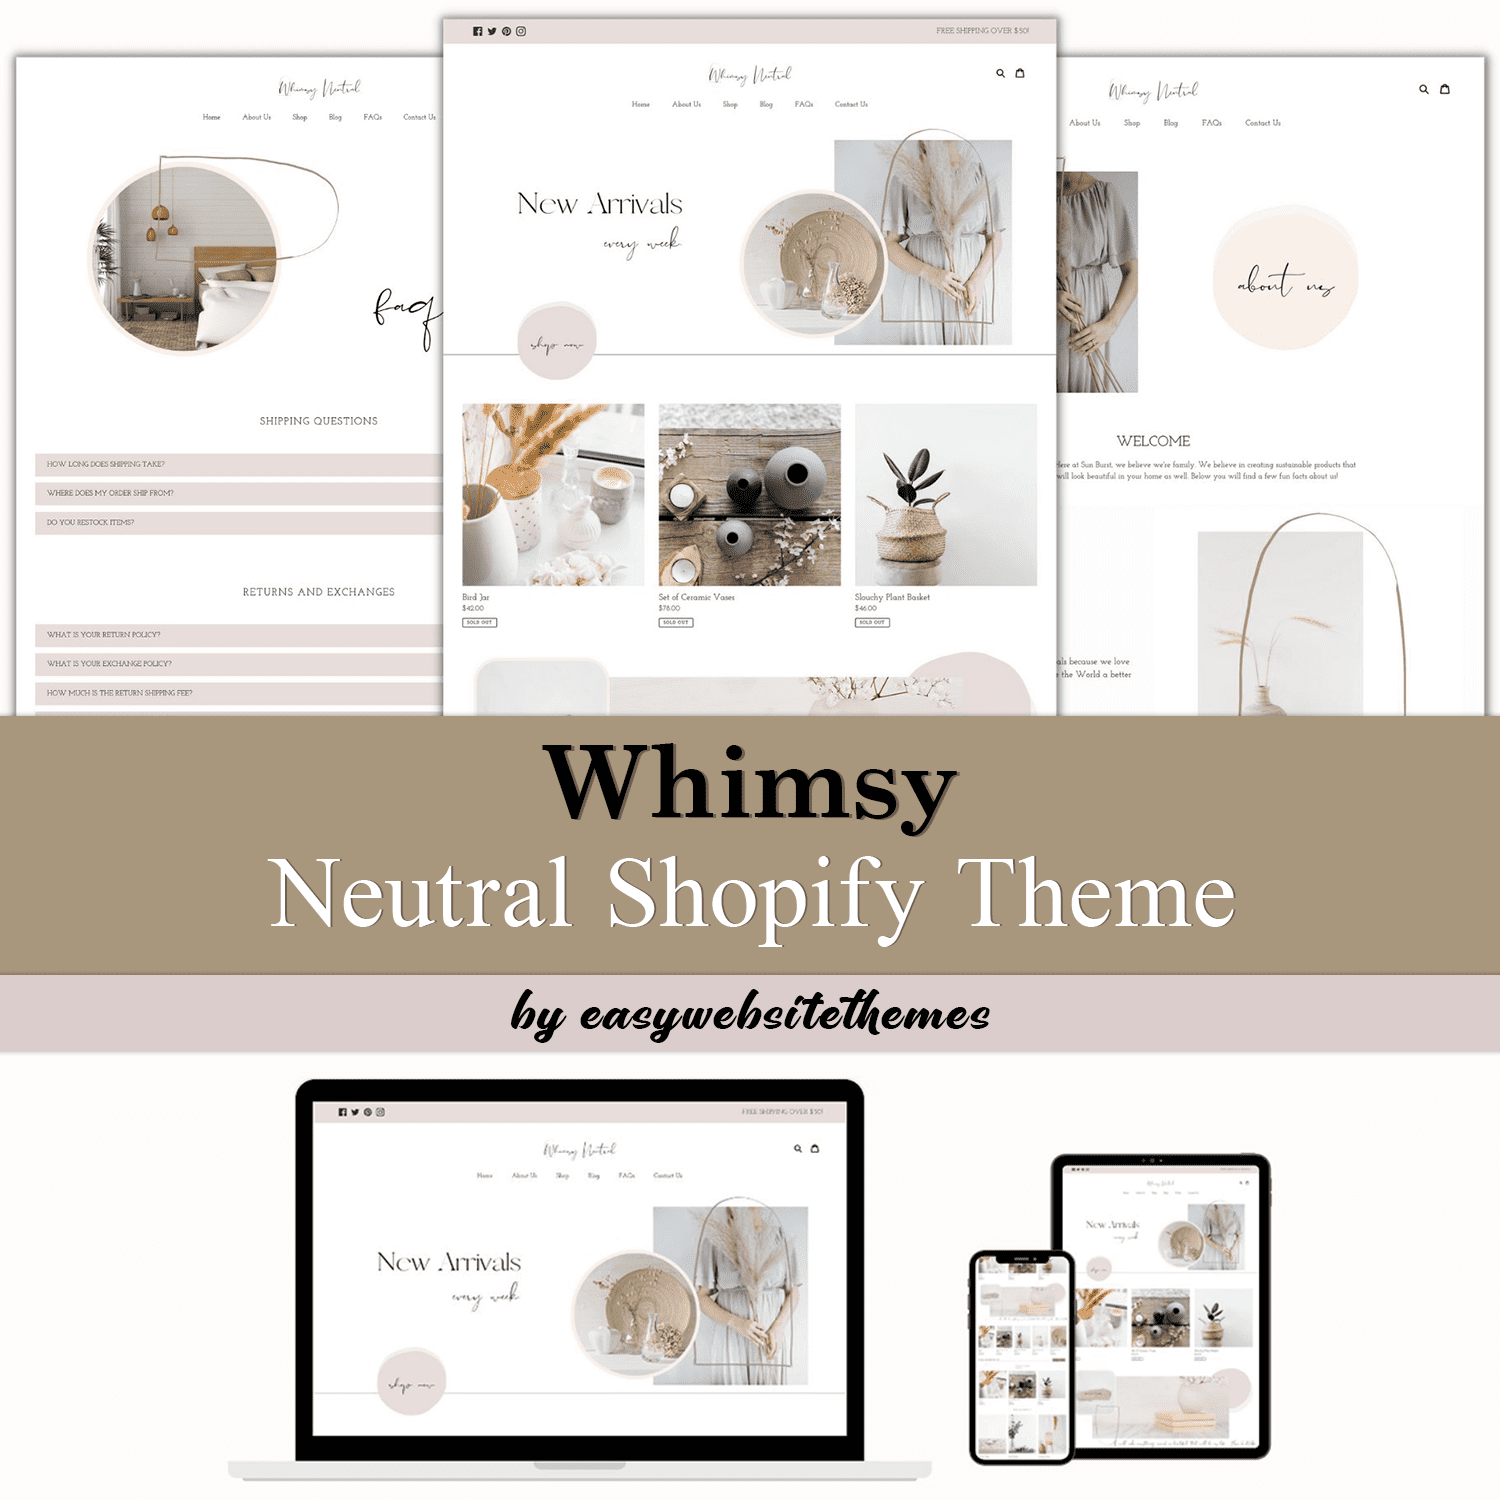 Neutral Shopify Theme | Whimsy from easywebsitethemes.